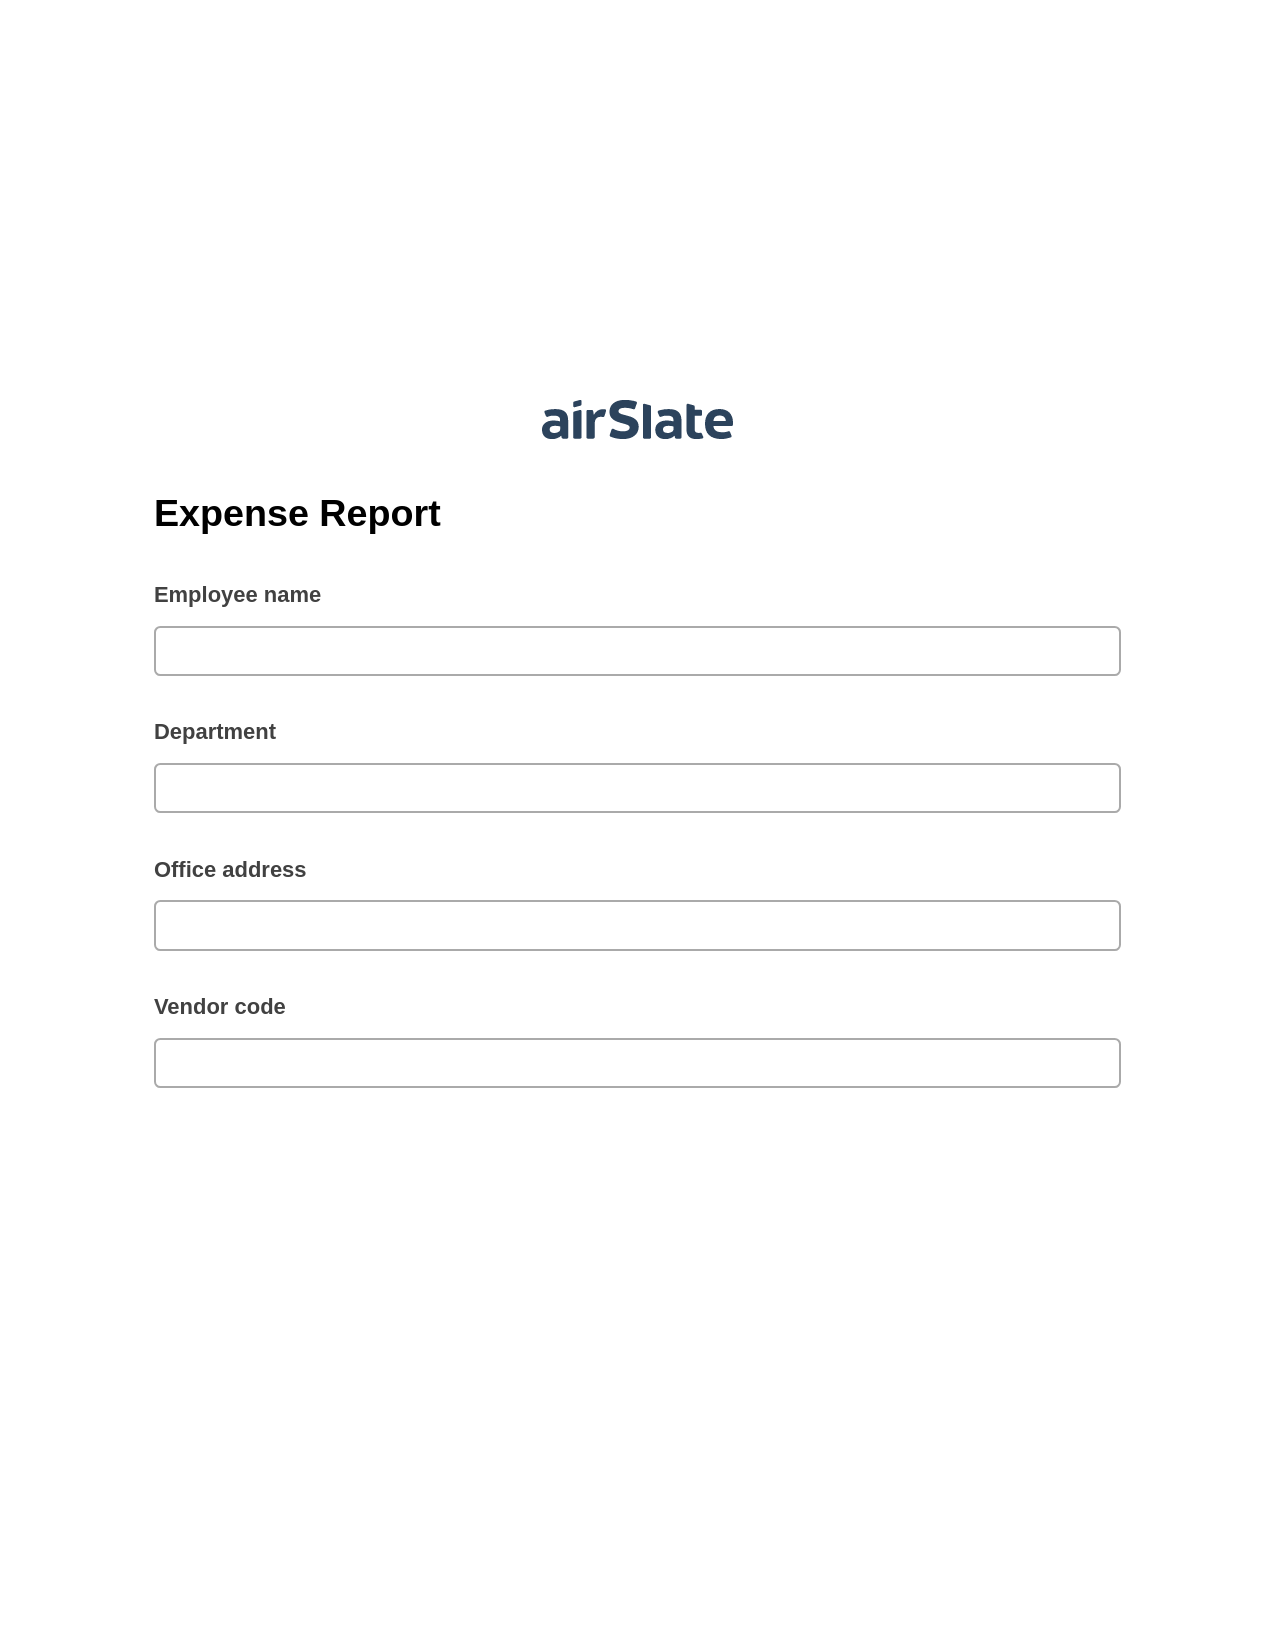 Expense Report Pre-fill Slate from MS Dynamics 365 Records Bot, Webhook Bot, Export to Smartsheet